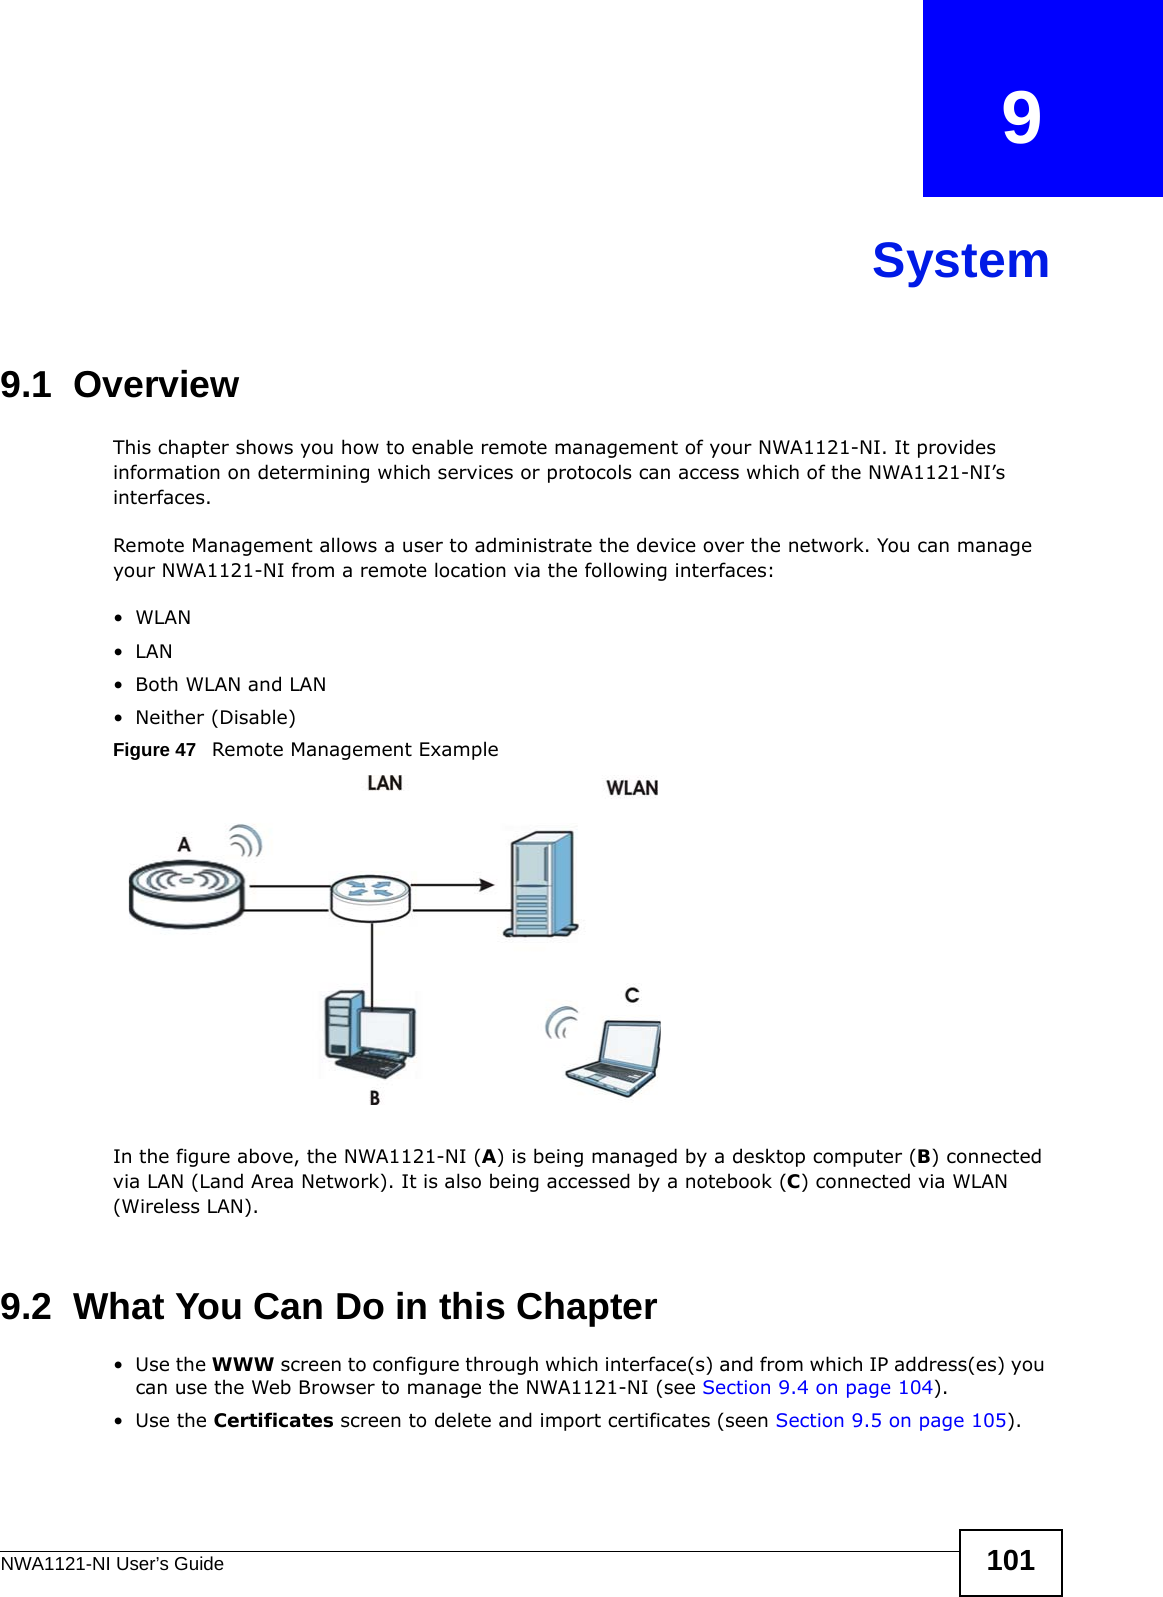 NWA1121-NI User’s Guide 101CHAPTER   9System9.1  OverviewThis chapter shows you how to enable remote management of your NWA1121-NI. It provides information on determining which services or protocols can access which of the NWA1121-NI’s interfaces.Remote Management allows a user to administrate the device over the network. You can manage your NWA1121-NI from a remote location via the following interfaces:•WLAN•LAN•Both WLAN and LAN• Neither (Disable)Figure 47   Remote Management ExampleIn the figure above, the NWA1121-NI (A) is being managed by a desktop computer (B) connected via LAN (Land Area Network). It is also being accessed by a notebook (C) connected via WLAN (Wireless LAN).9.2  What You Can Do in this Chapter•Use the WWW screen to configure through which interface(s) and from which IP address(es) you can use the Web Browser to manage the NWA1121-NI (see Section 9.4 on page 104). •Use the Certificates screen to delete and import certificates (seen Section 9.5 on page 105).